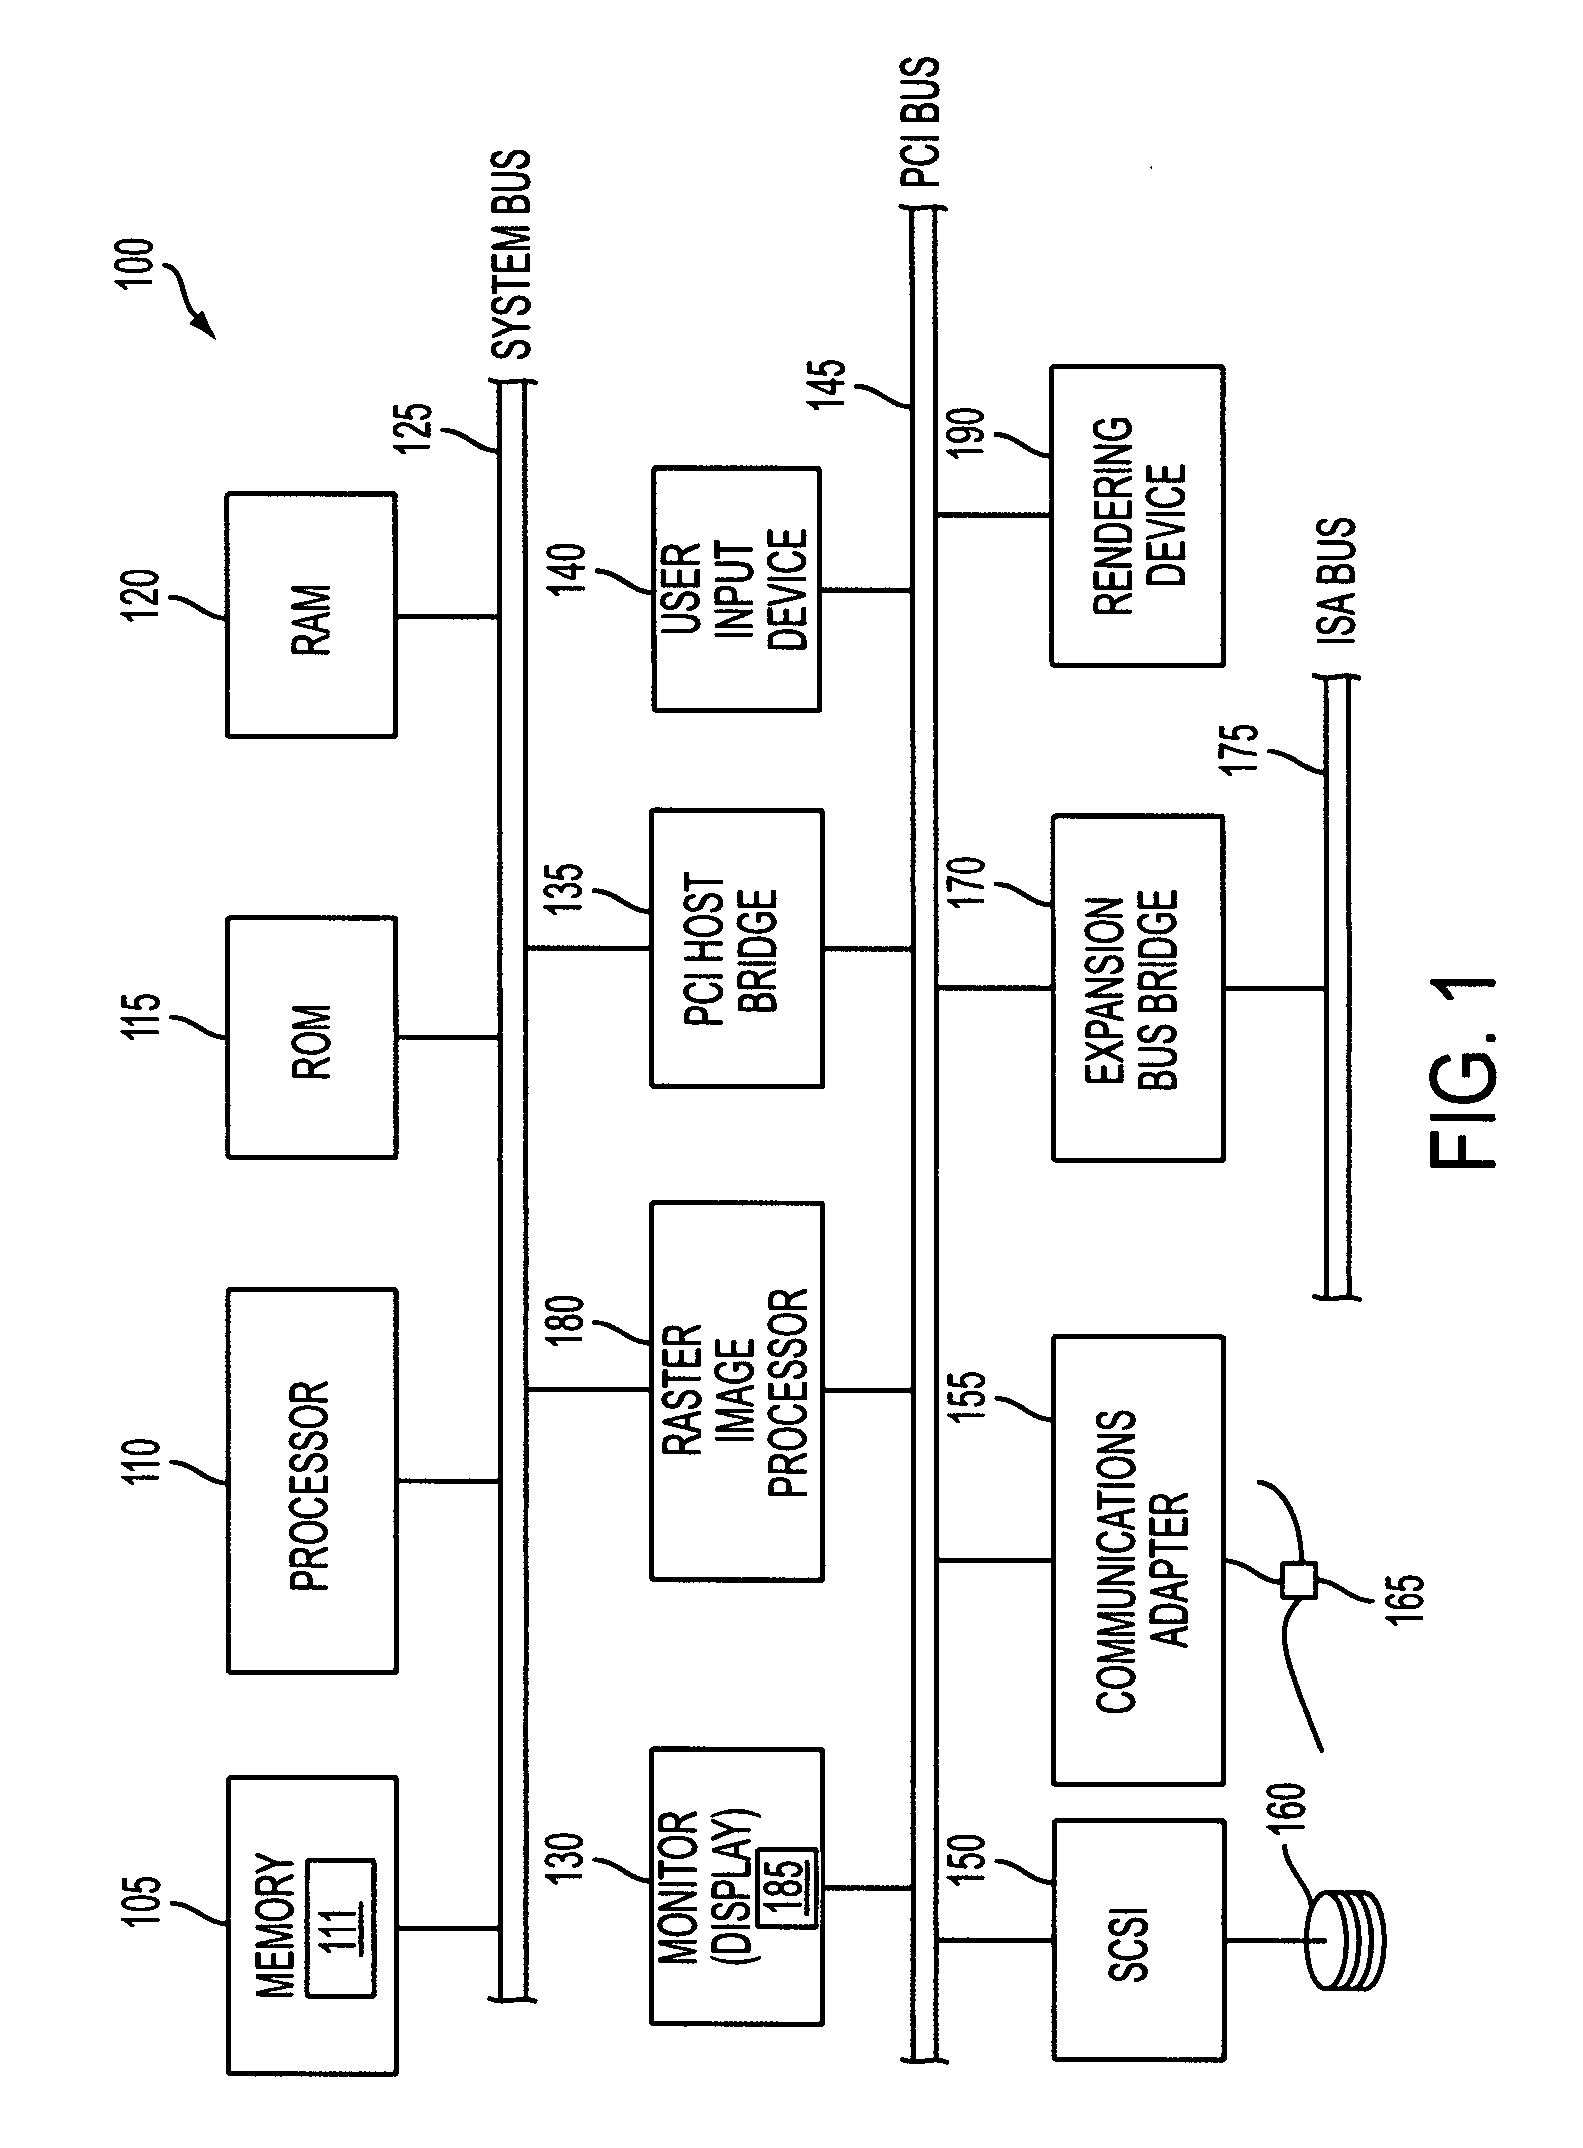 Method and system for adding processes to print production workflows utilizing asset metadata and automated reasoning